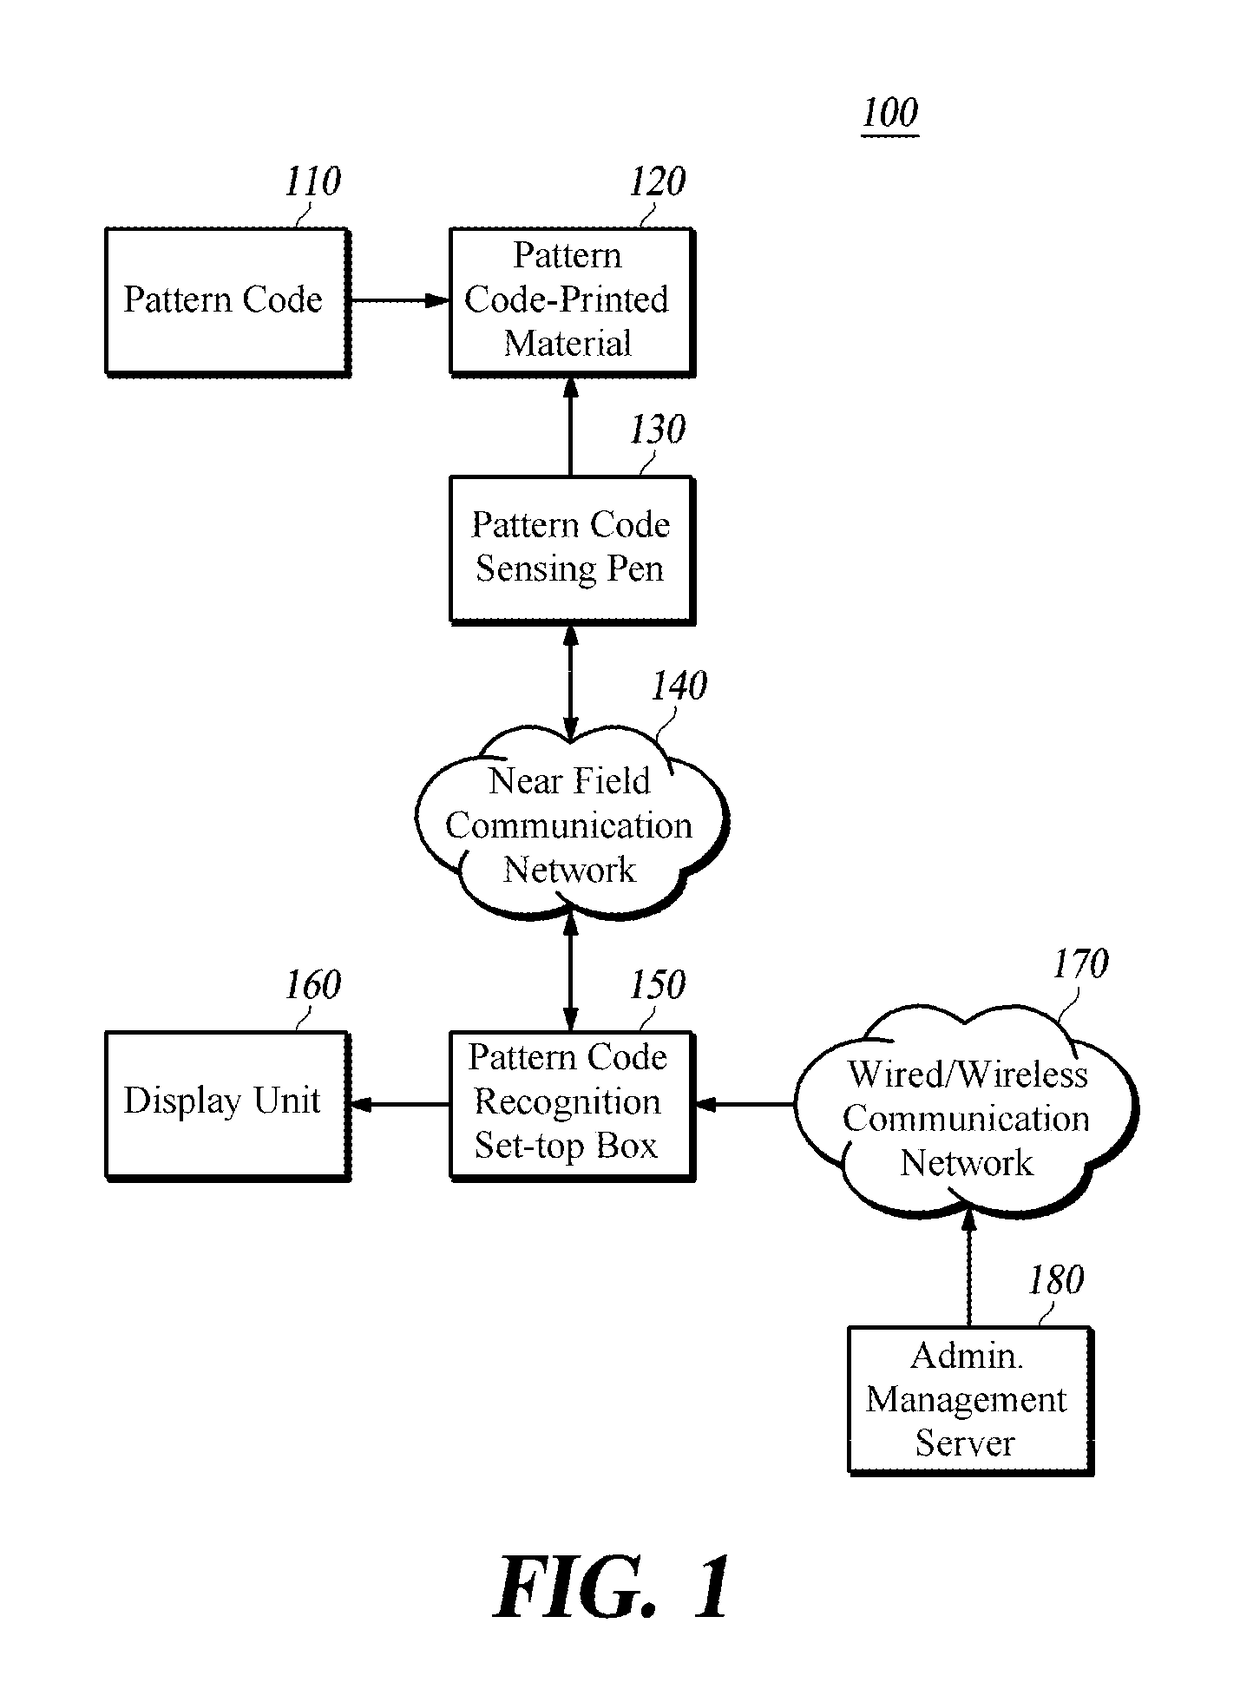 Pattern code recognition multimedia playback apparatus, and method for driving same